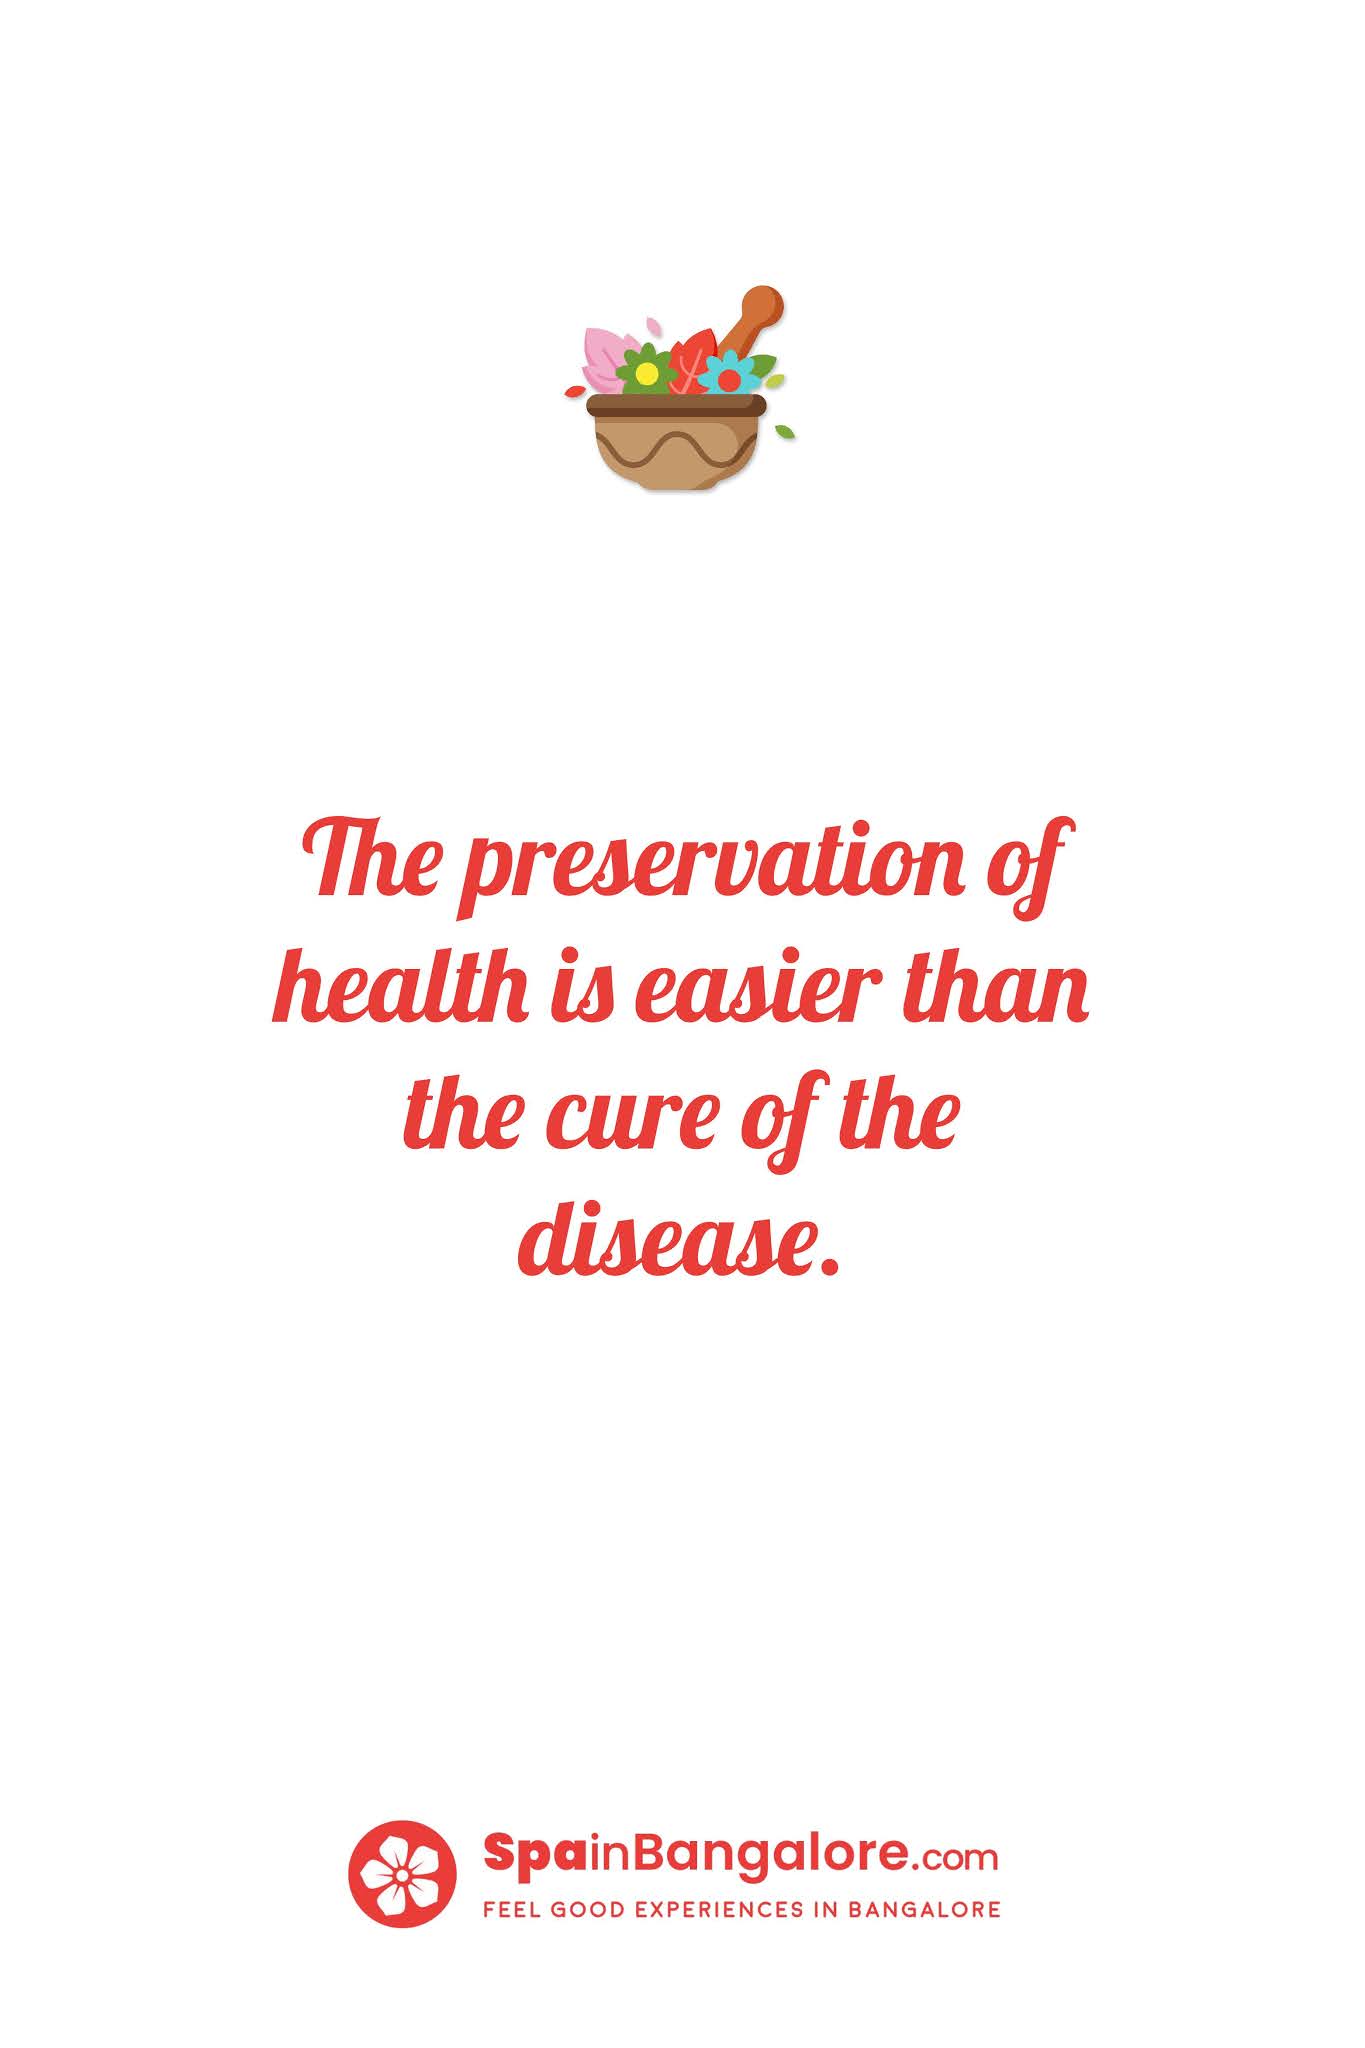 The preservation of health is easier than the cure of the disease.